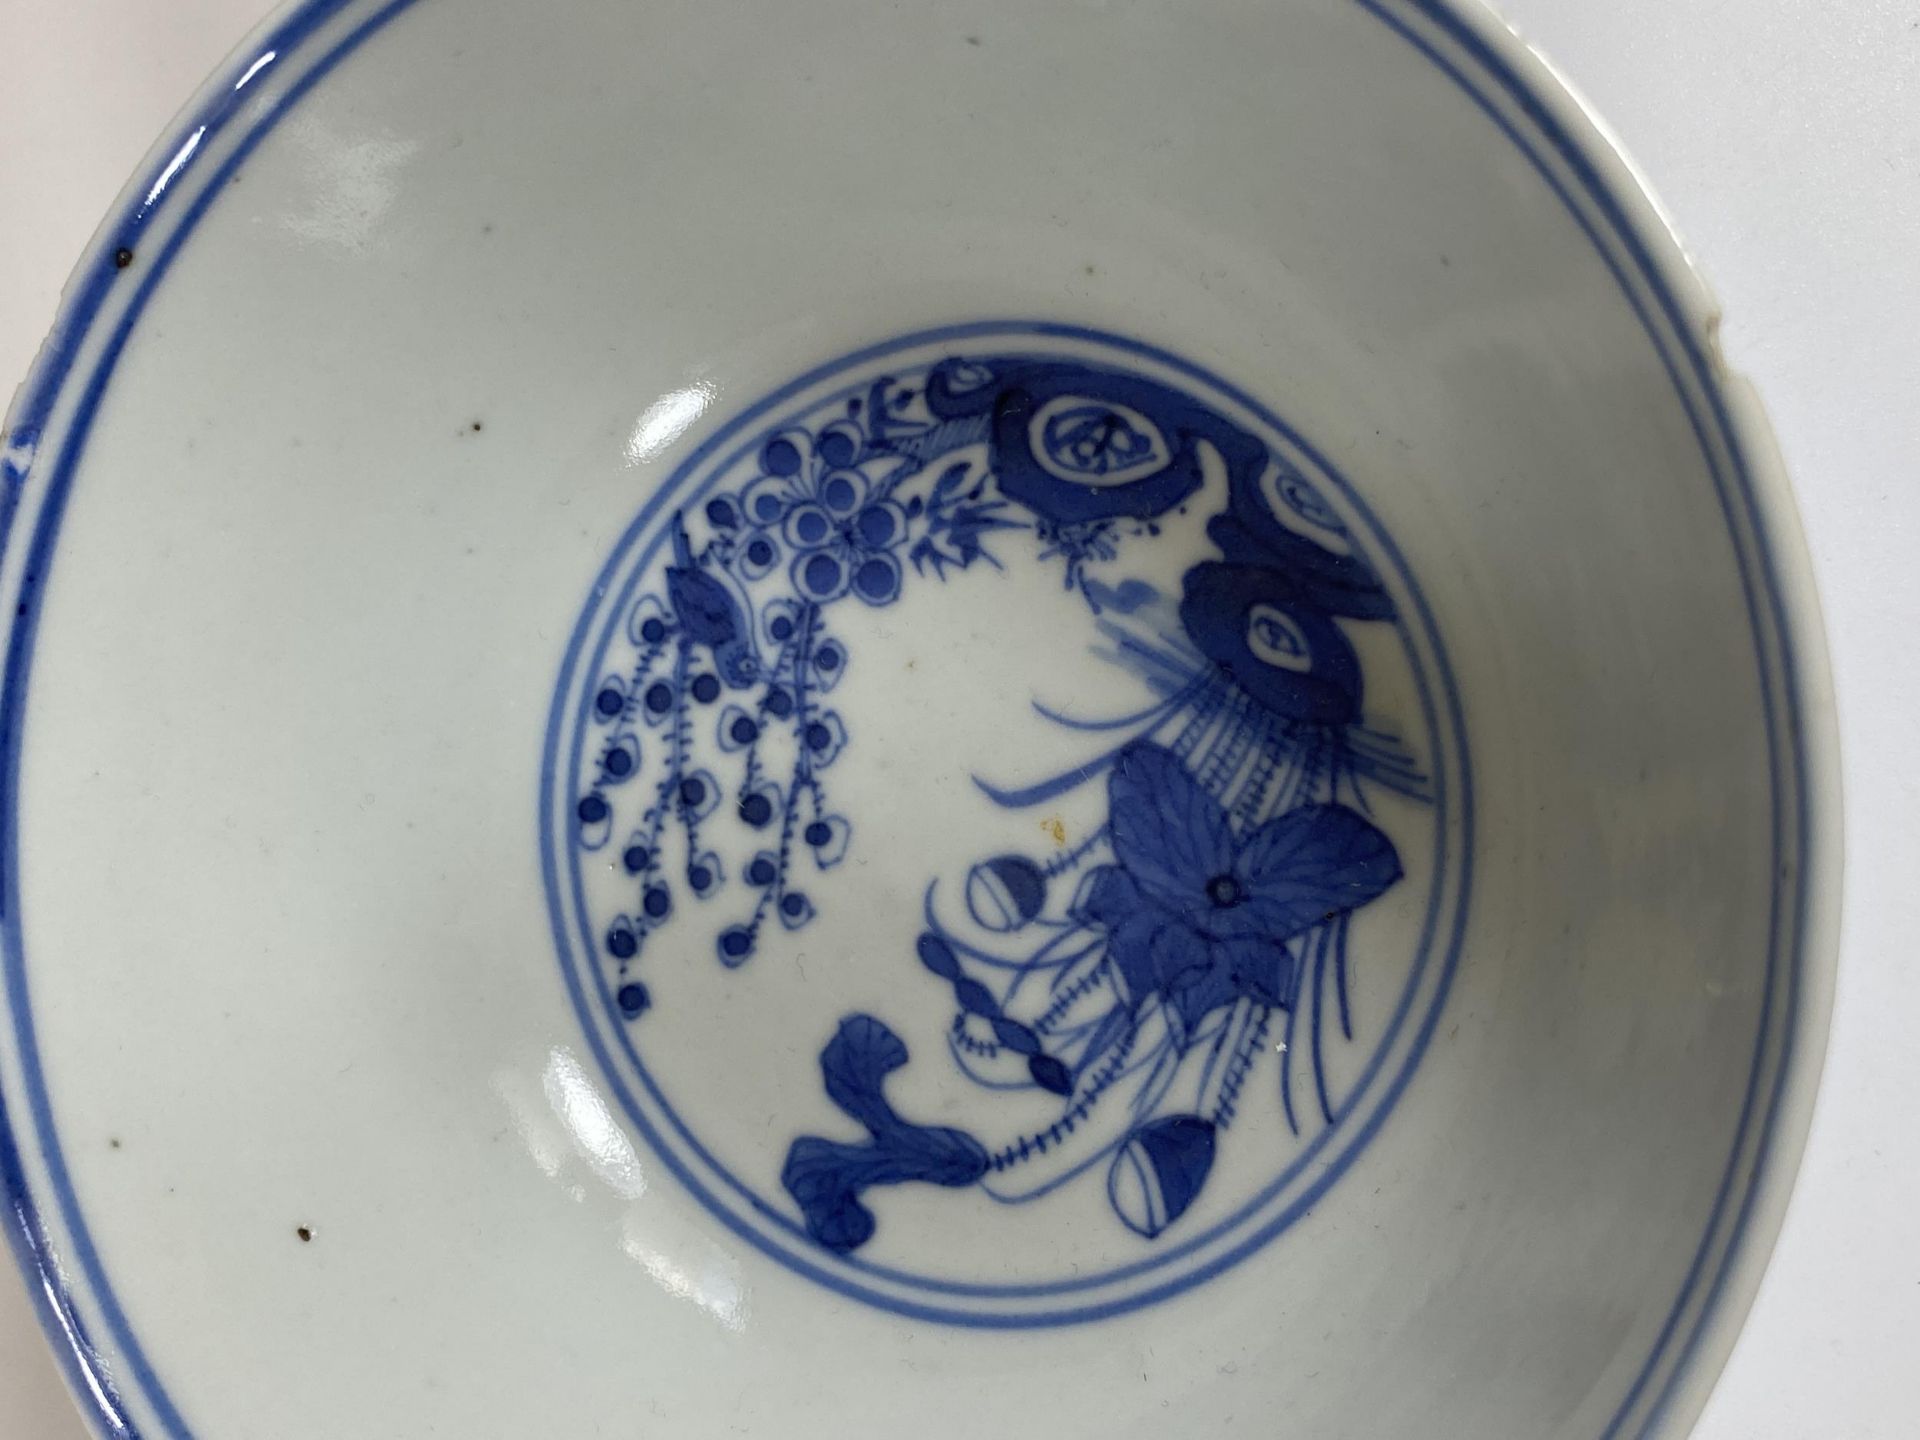 A LATE 19TH CENTURY CHINESE KANGXI REVIVAL BLUE AND WHITE PORCELAIN BOWL WITH DRAGON IN THE CLOUDS - Image 3 of 7